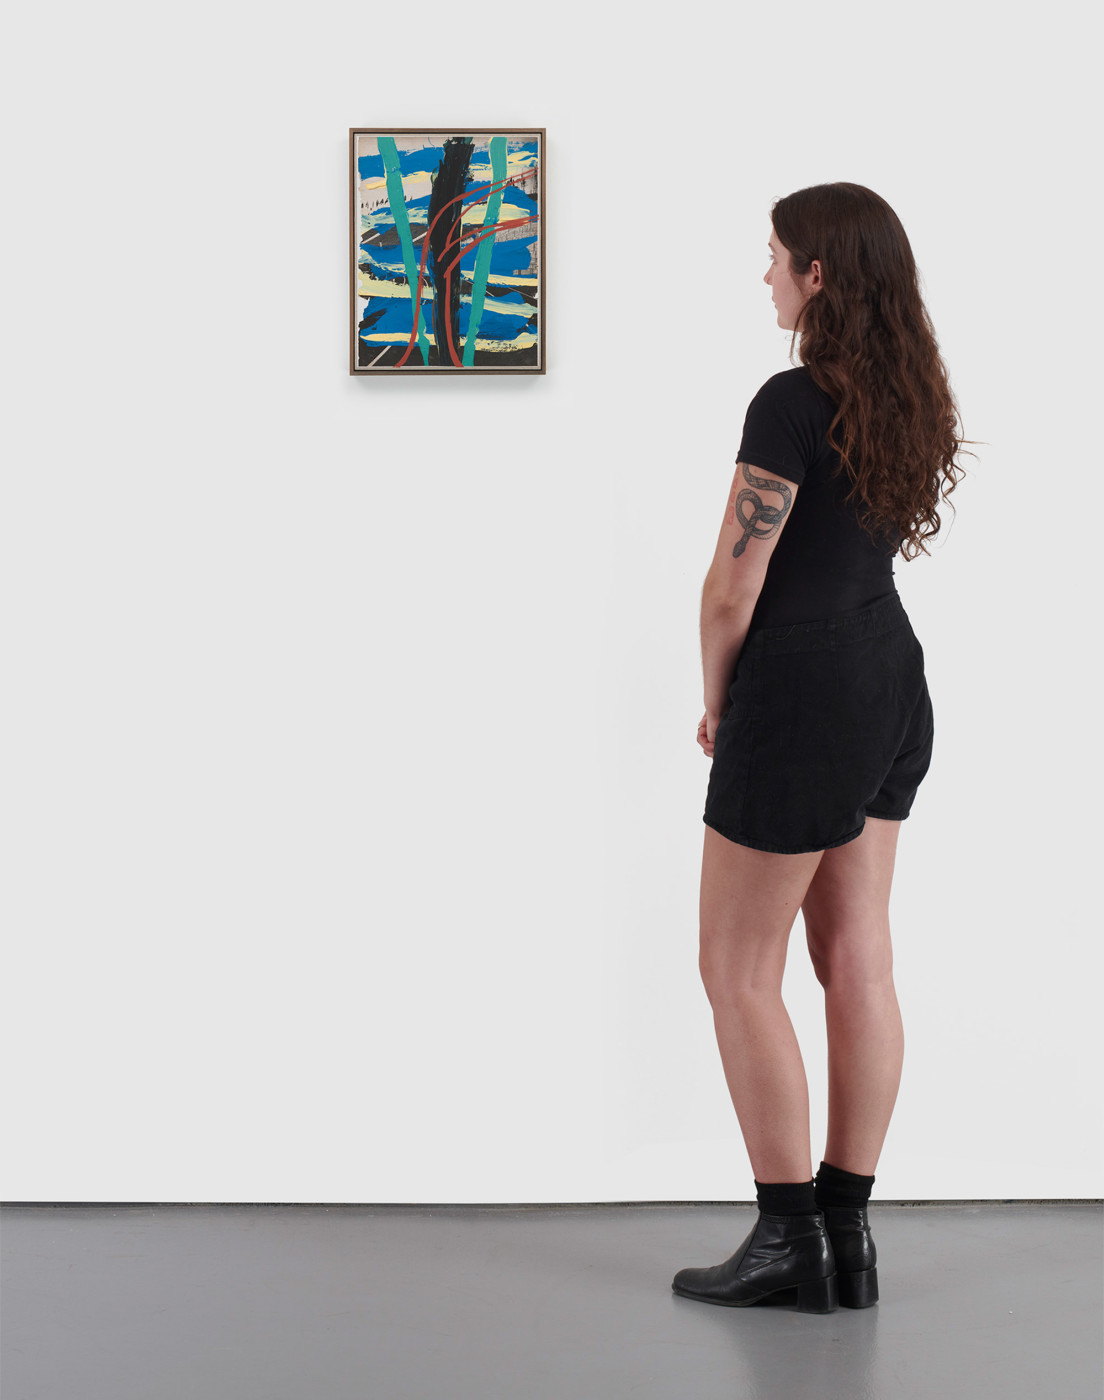 Artwork with person for scale